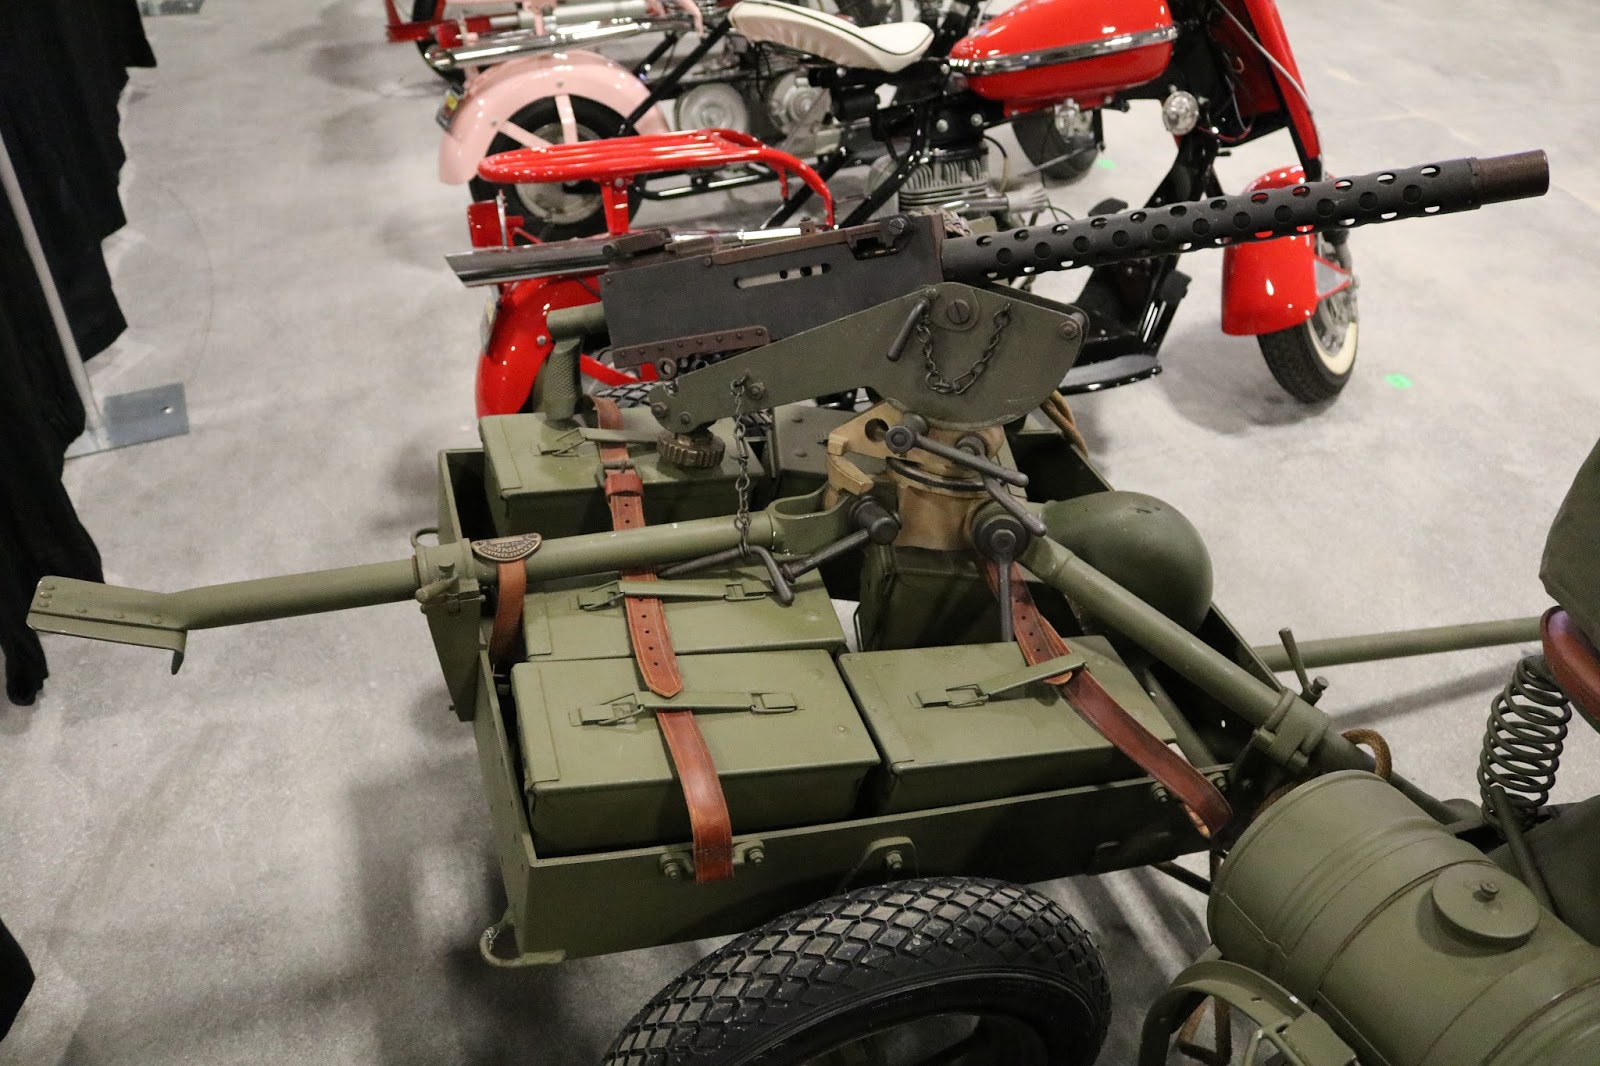 OldMotoDude: 1944 Cushman Model 53 Airborne sold for $10,000 at the